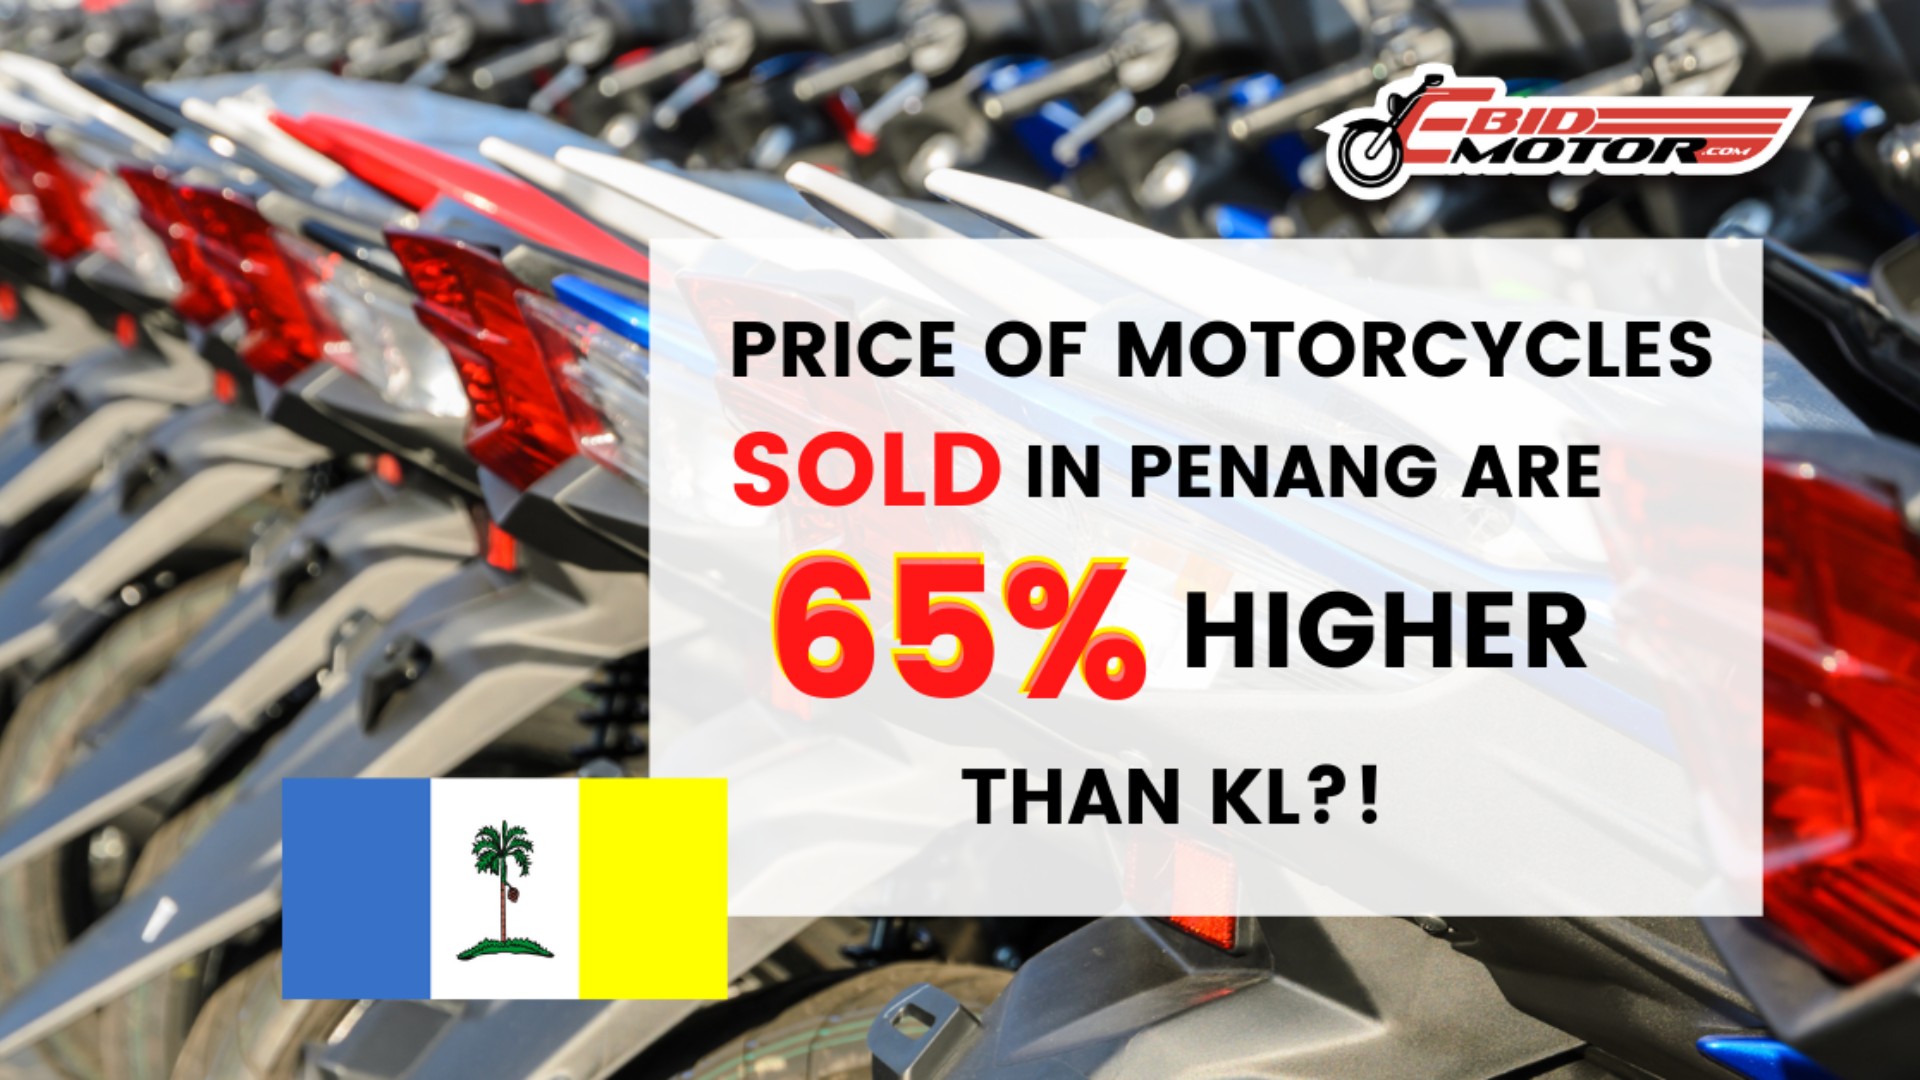 Upgrade Your Motorcycle? Our Motorcycle Price is 35% Lower Than Your Place! Delivery Available!